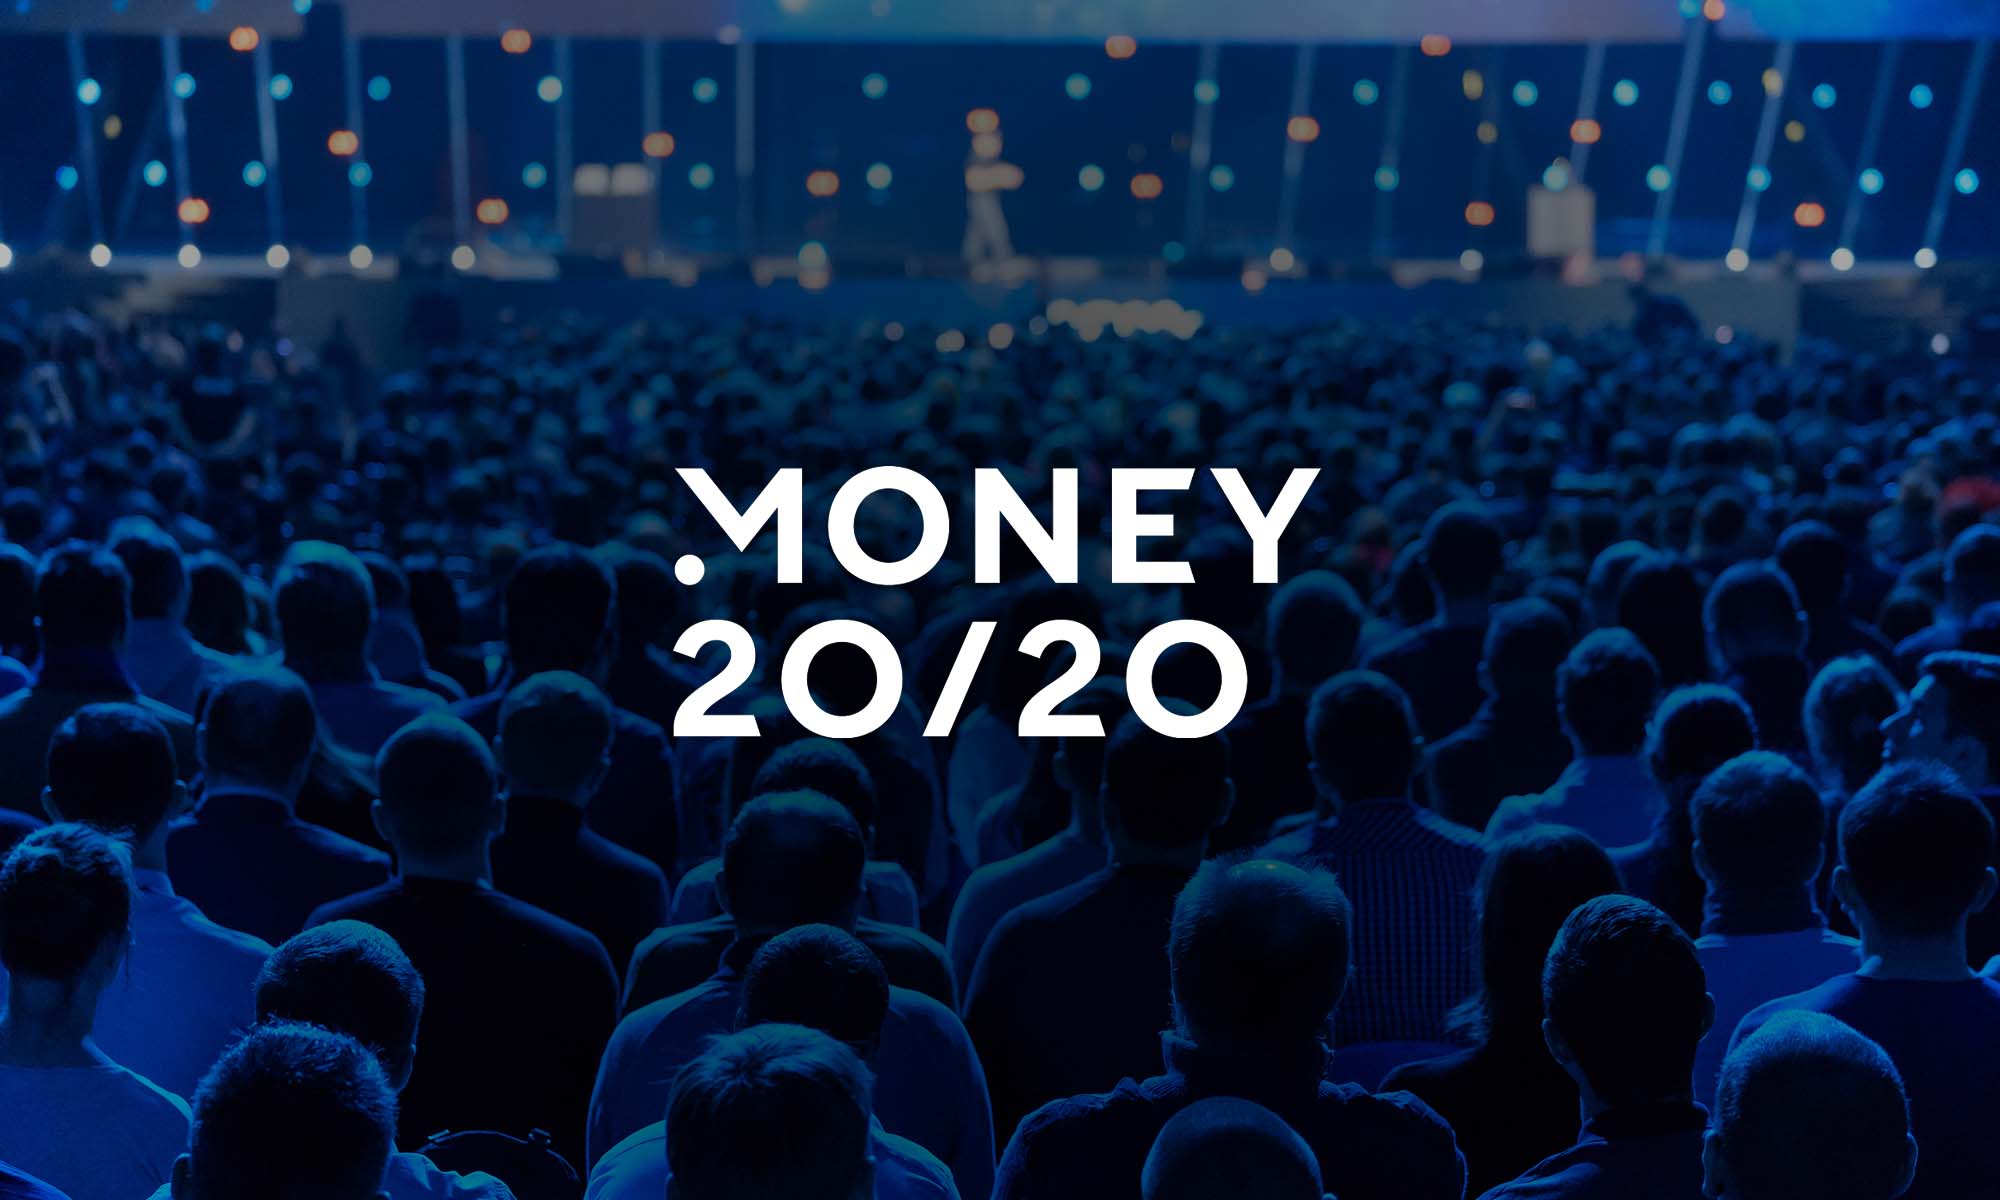 Large Crowd at Money 2020 Event